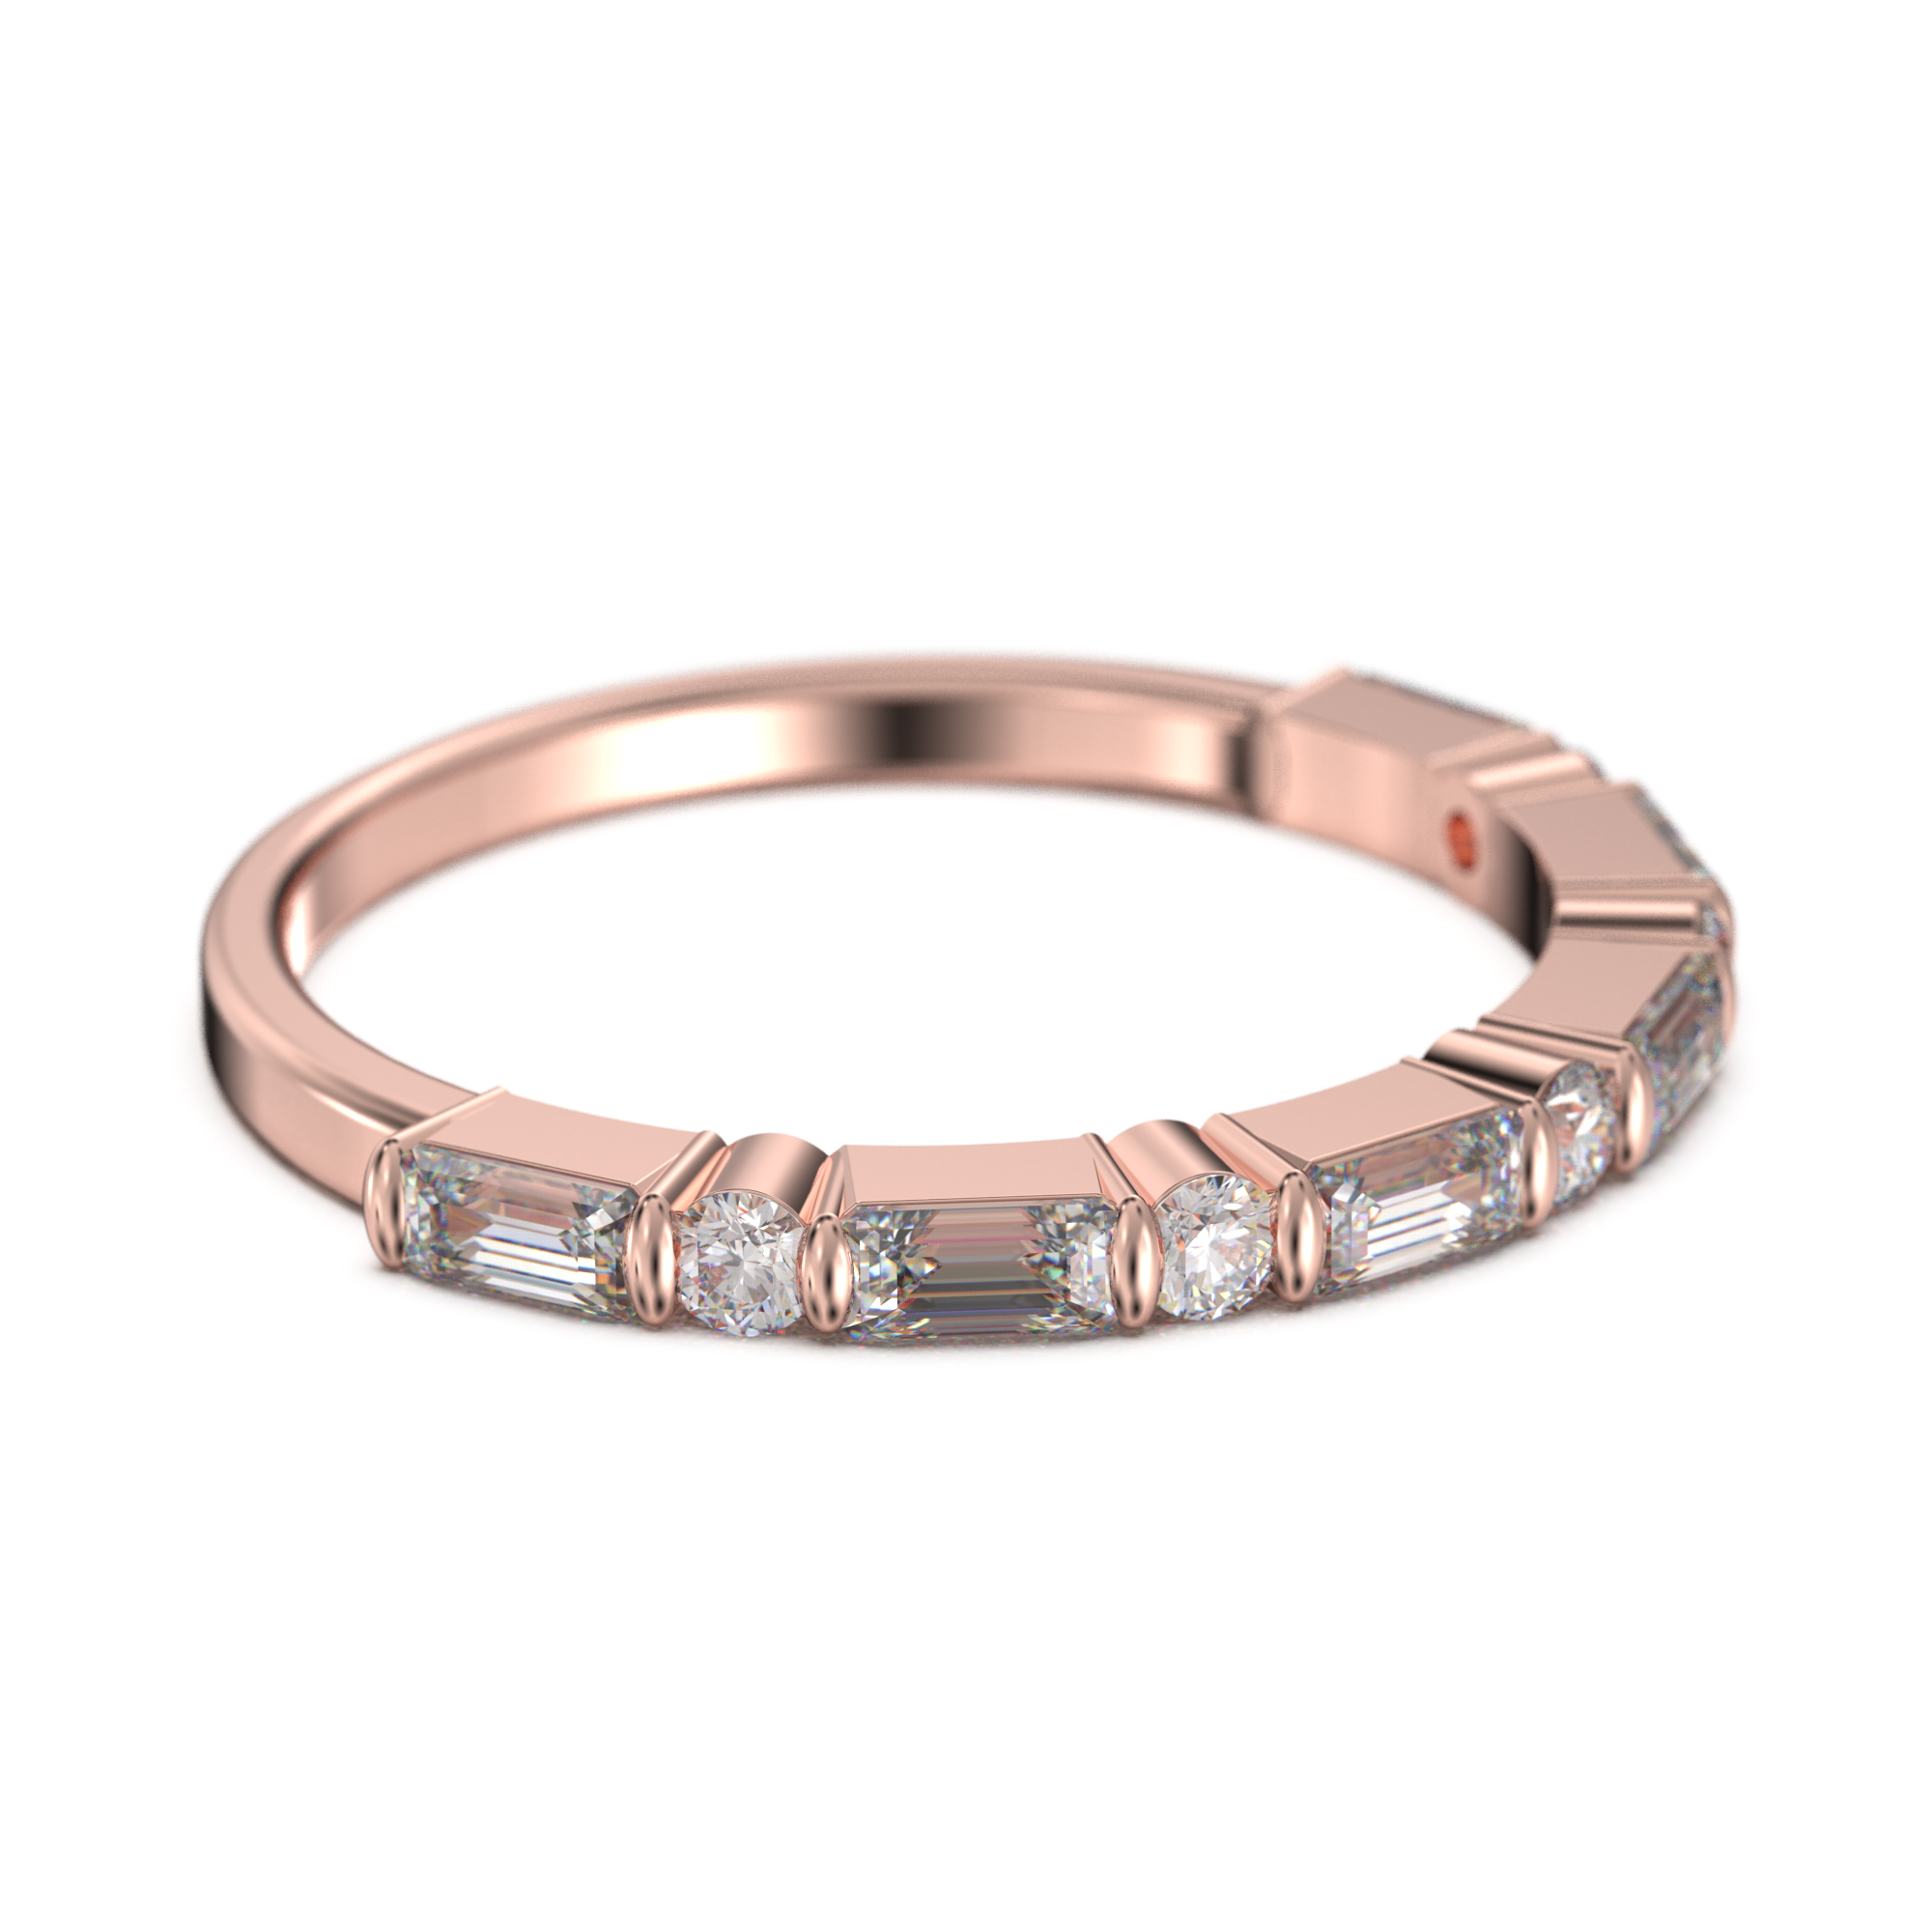 JeenJewels 0.73ct Round and Baguette Cut Diamond Moissanite Ring 18K Rose Gold Over Silver